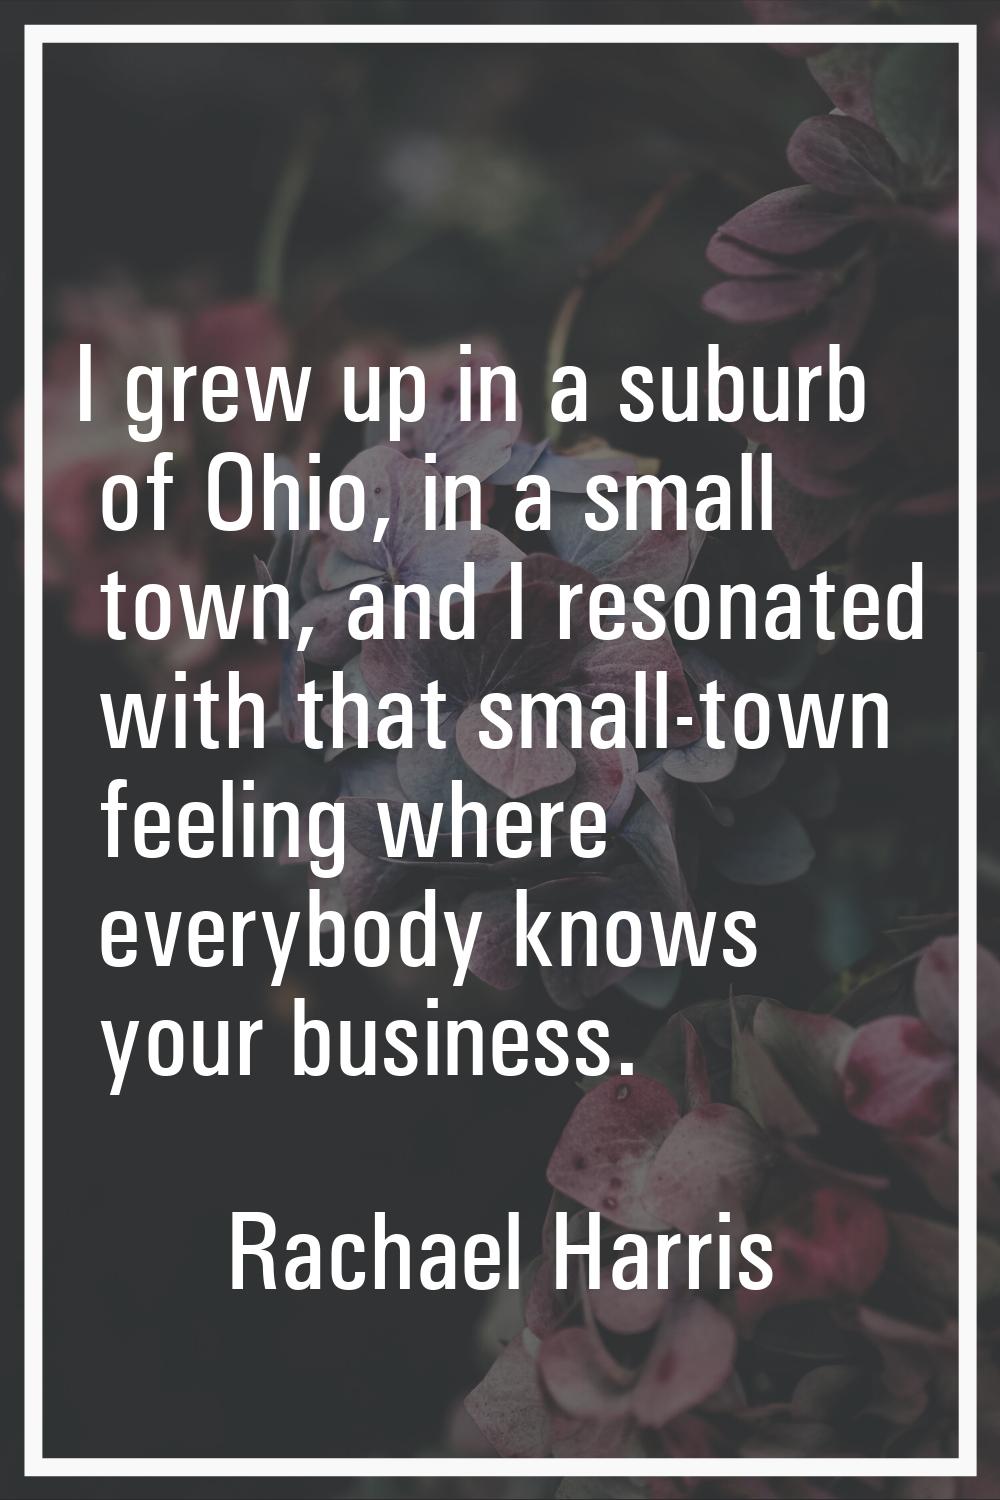 I grew up in a suburb of Ohio, in a small town, and I resonated with that small-town feeling where 